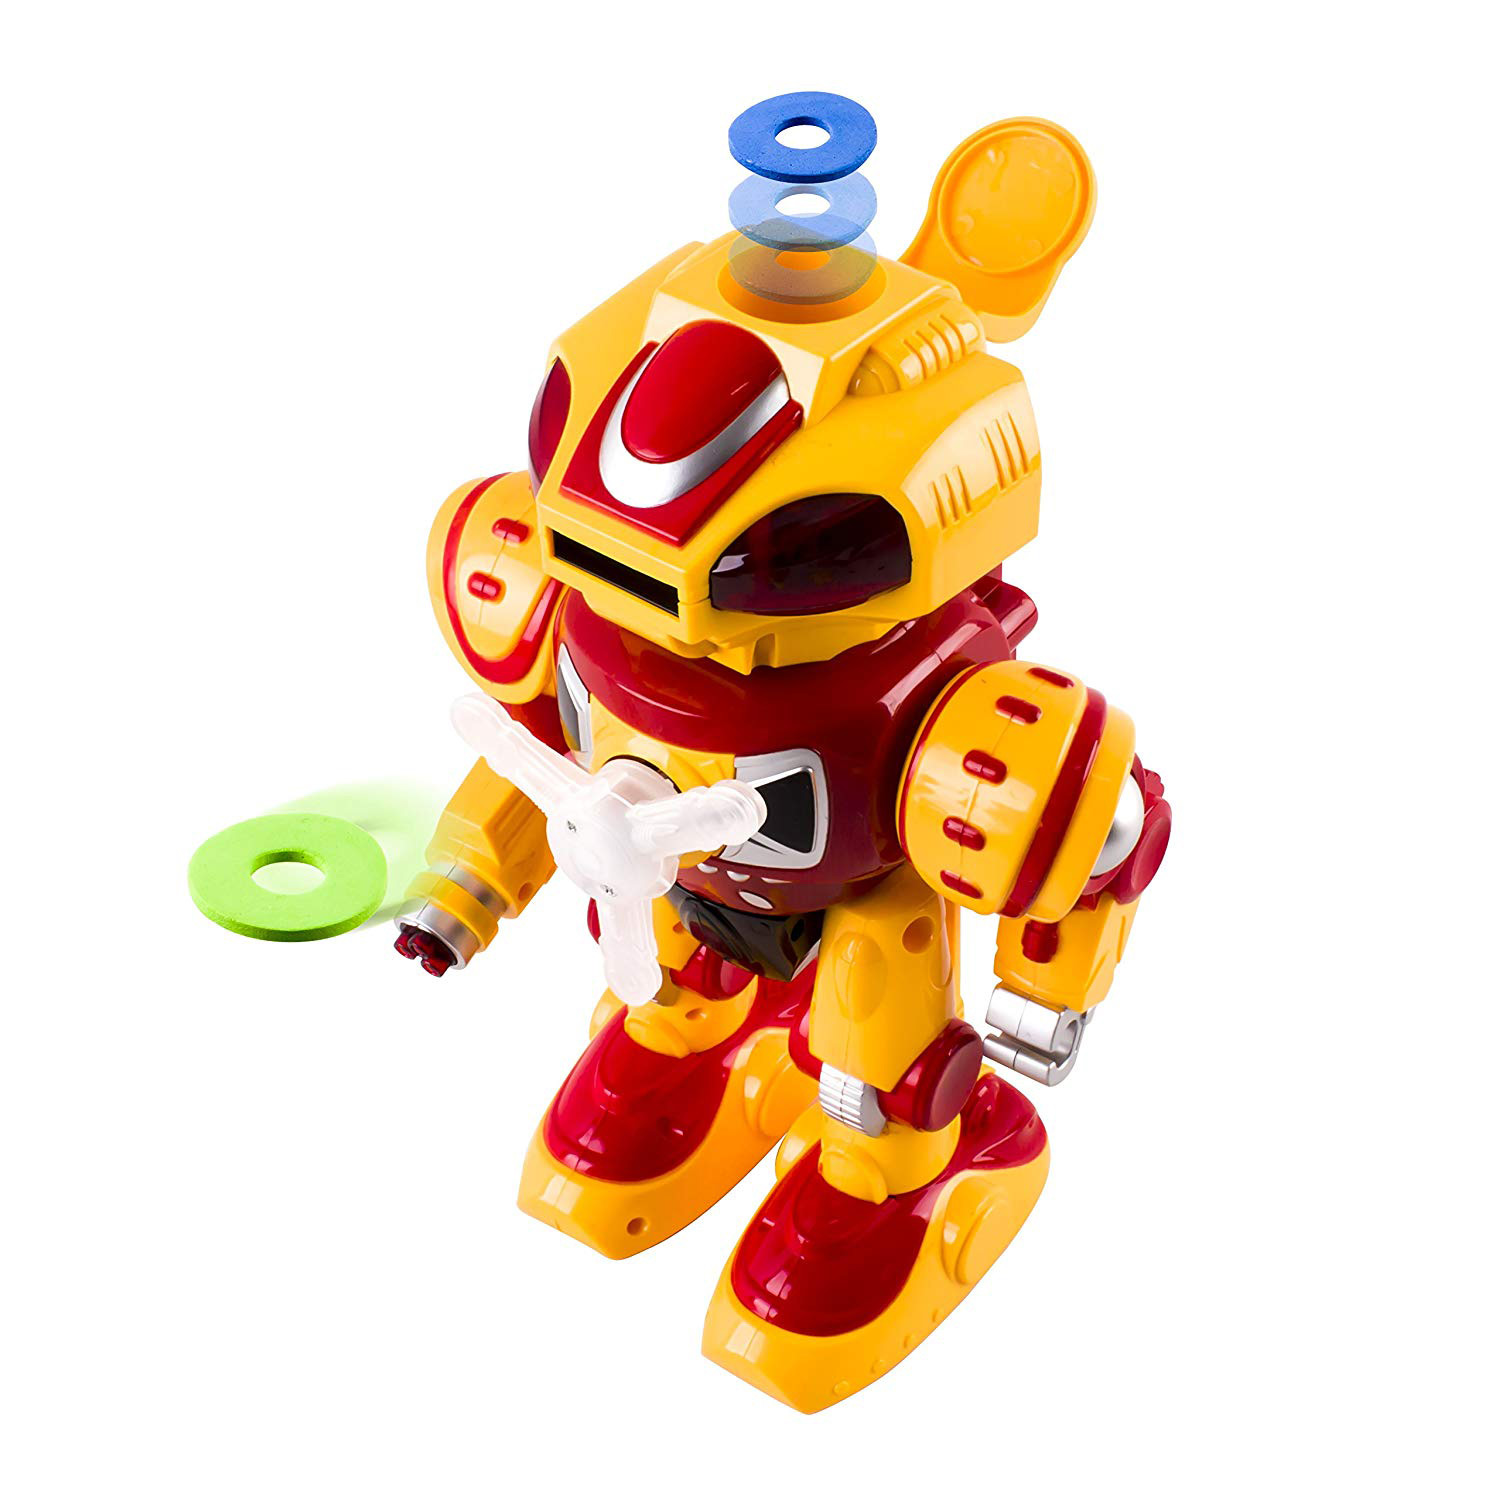 Super Android Toy Robot With Disc Shooting Walking Flashing Lights And Sound Features Great Action Toy For Kids Boys Girls Toddlers Battery Operated Yellow KD-8808B